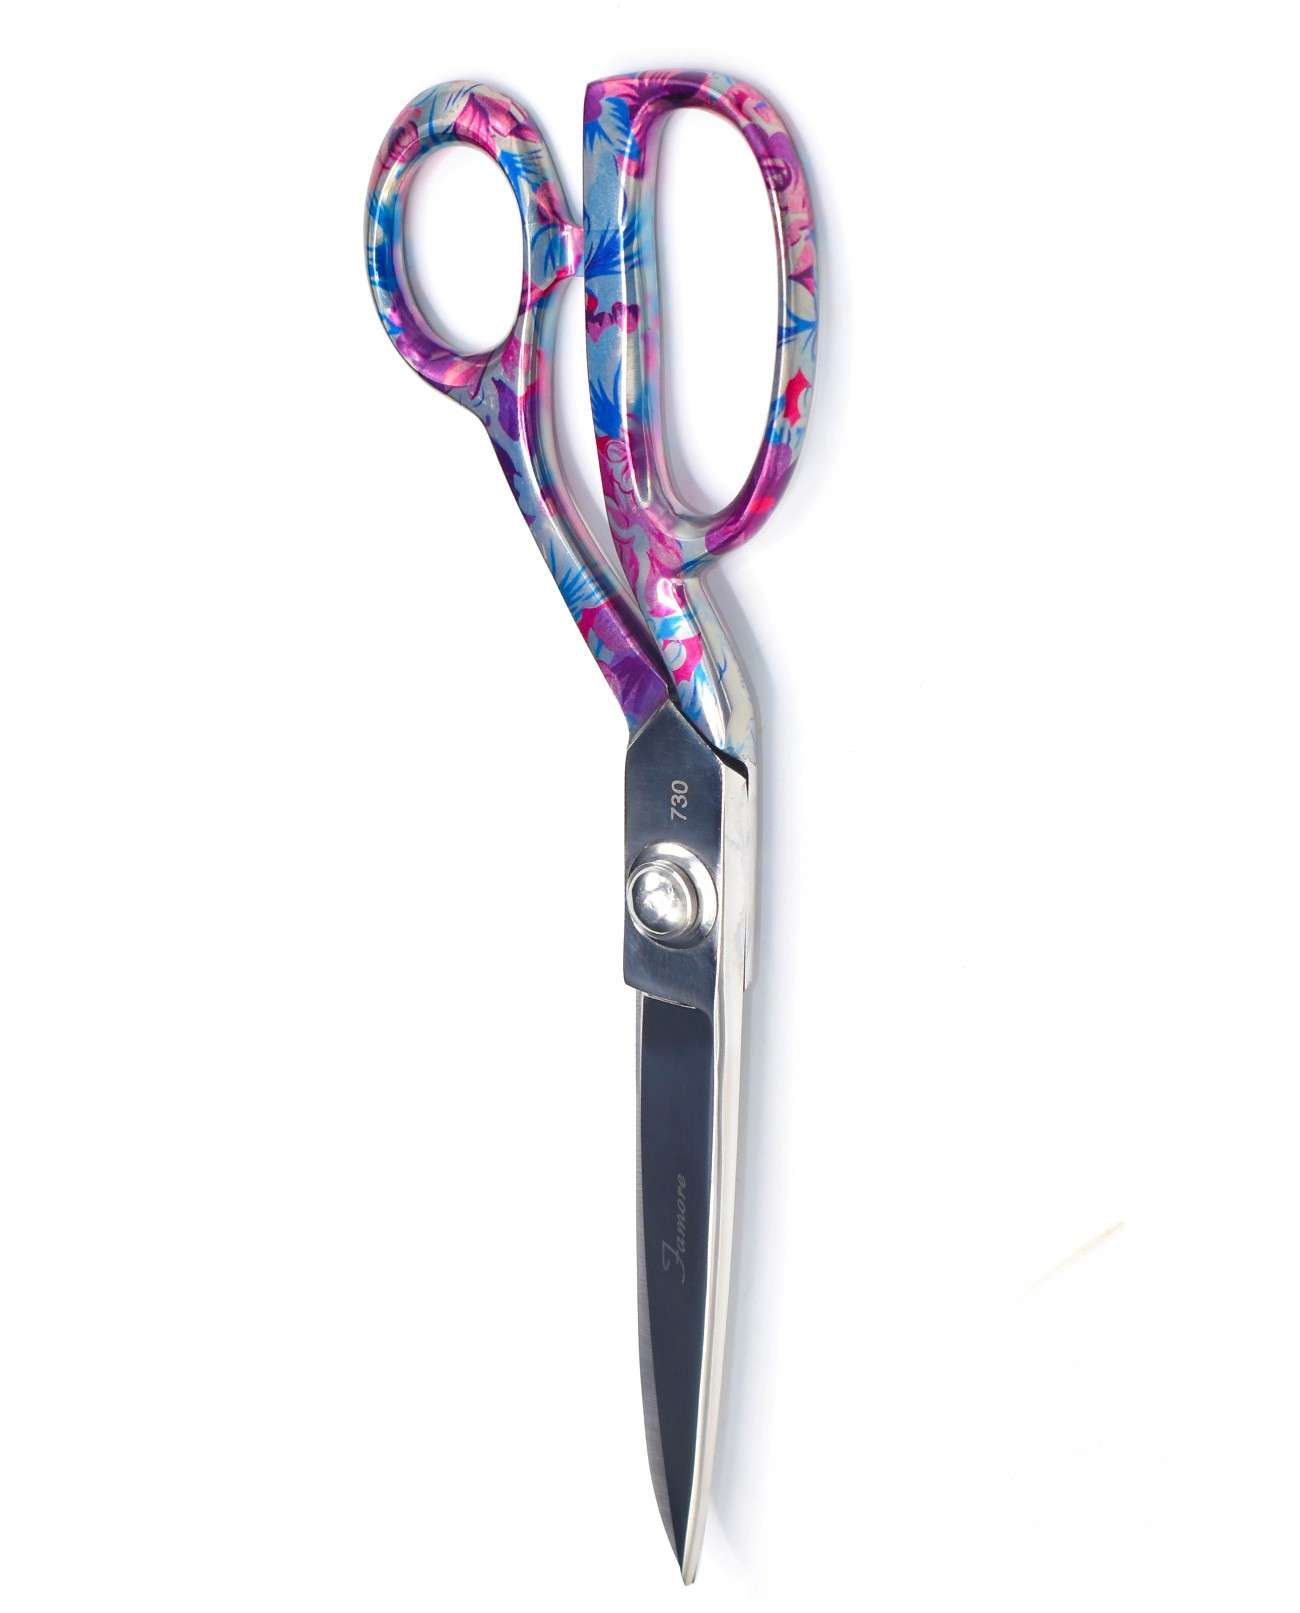 THE best sewing scissors – Learn To Serge